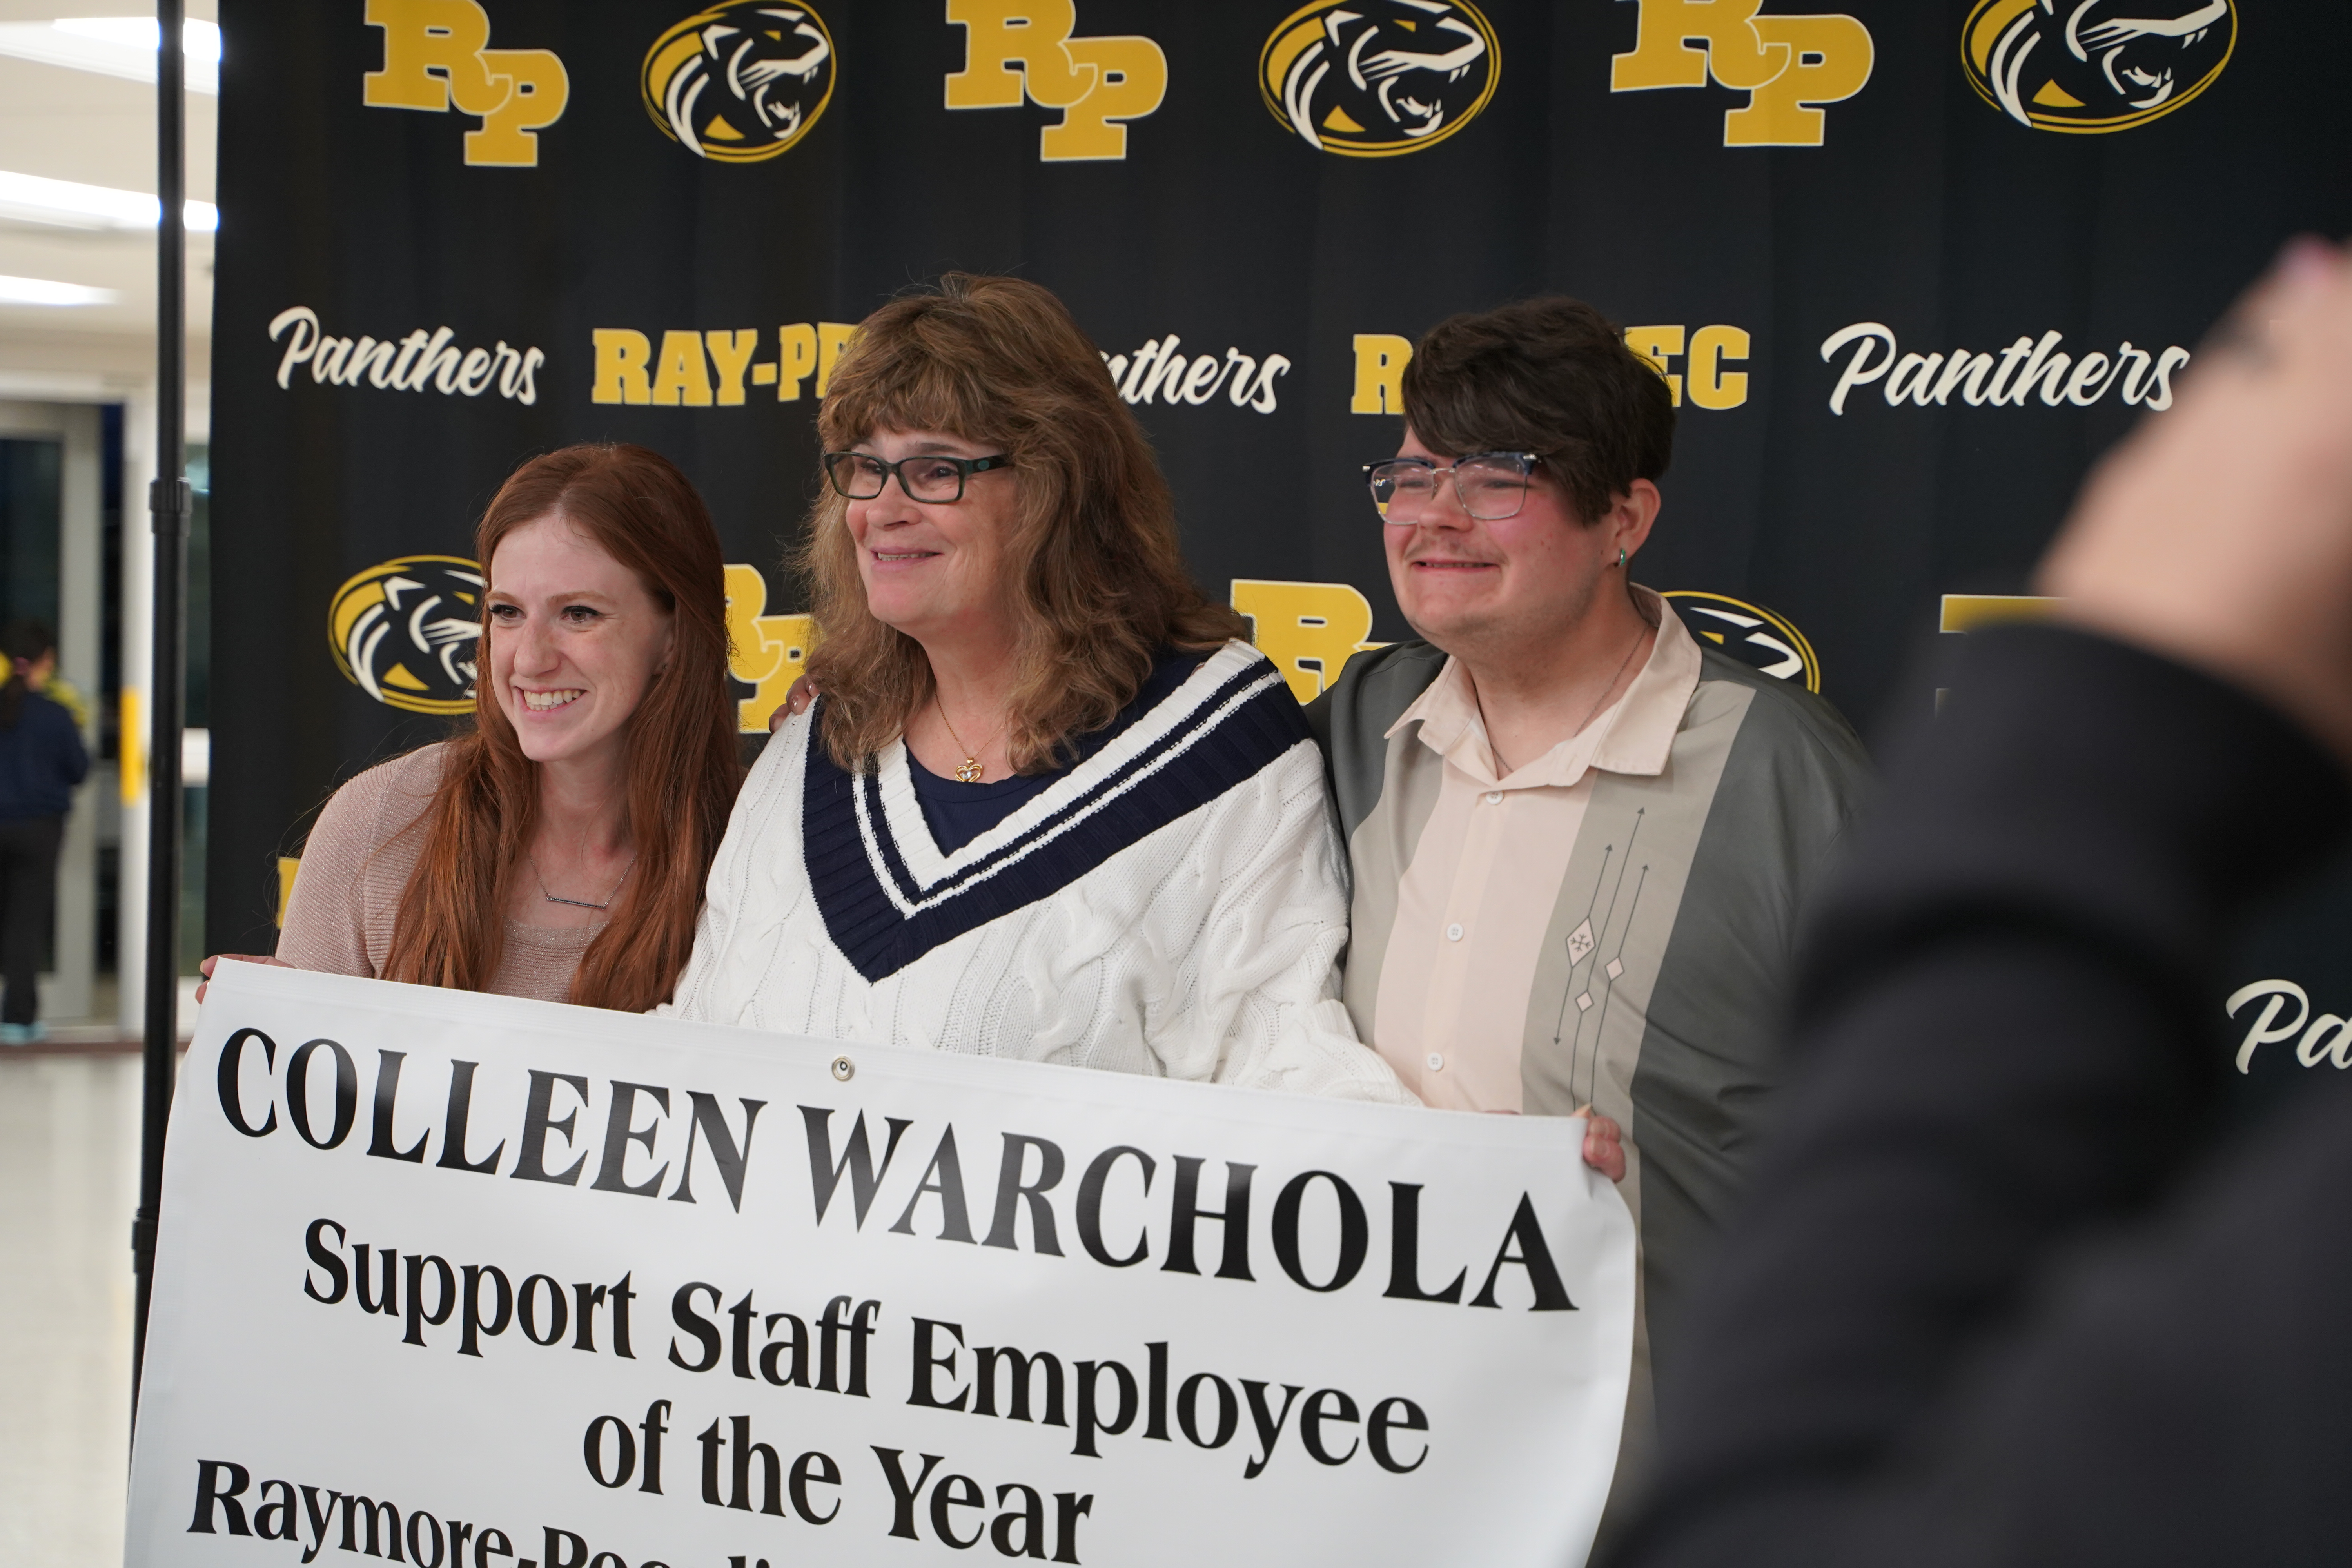 Colleen Warchola - Support Staff Employee of the Year